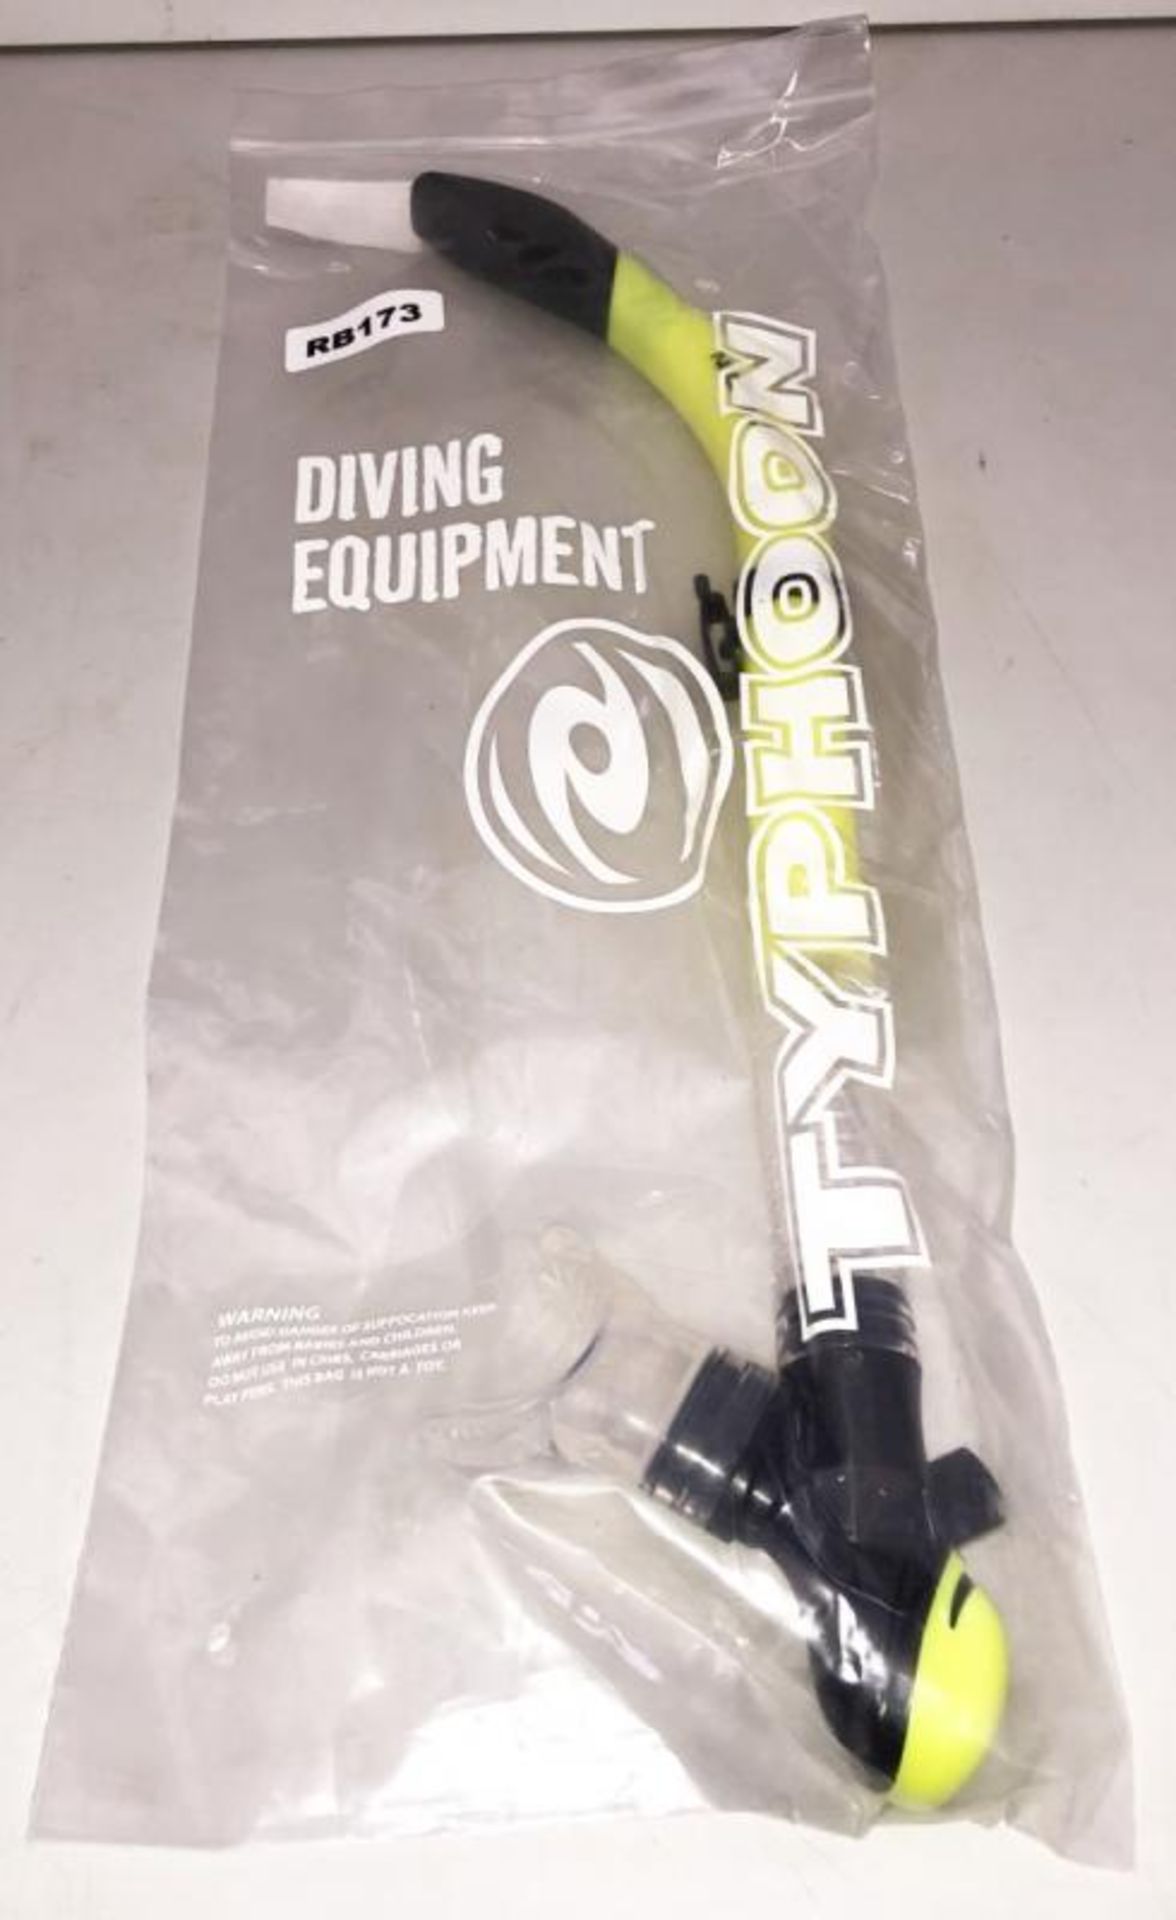 34 x Branded Diving Snorkel's - CL349 - Altrincham WA14 - Brand New! - Image 3 of 30